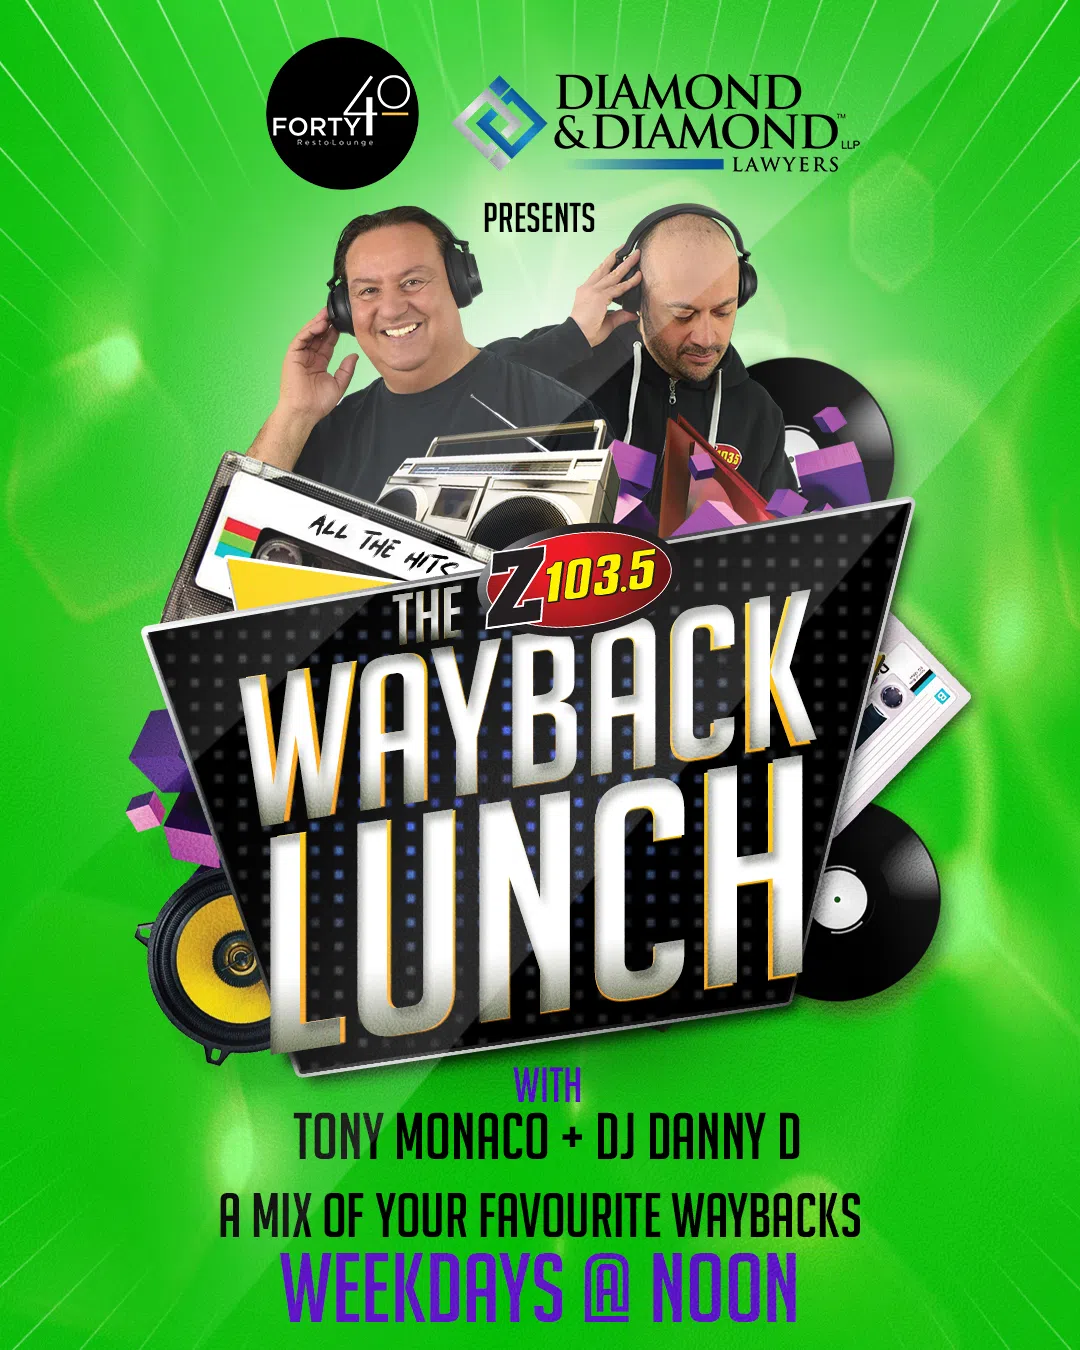 Feature: https://z1035.com/the-wayback-lunch/